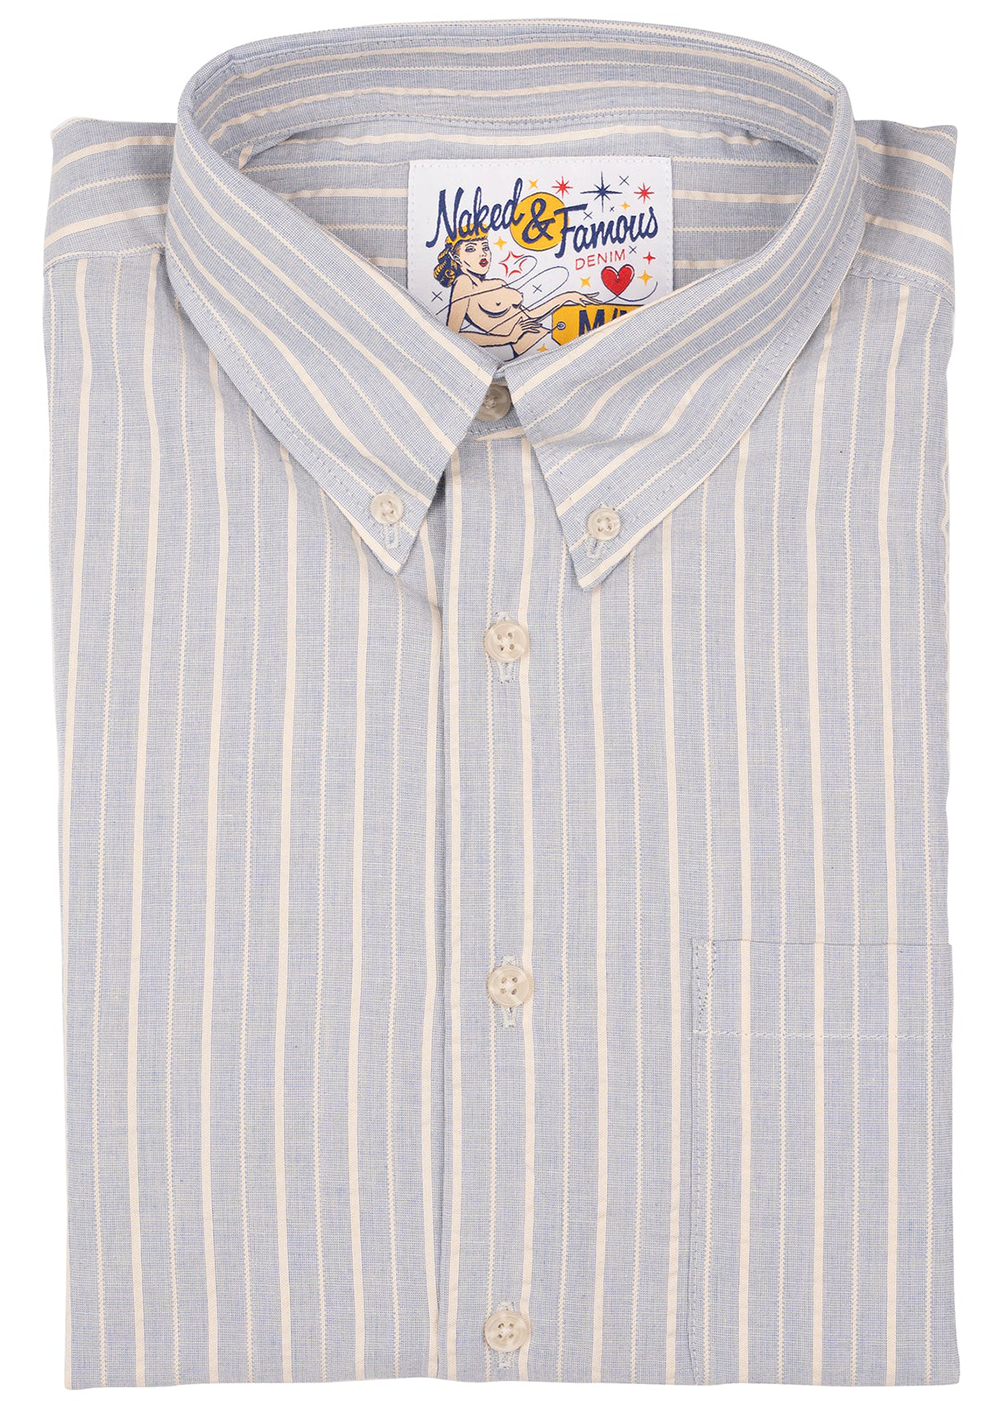 Easy Shirt - Organic Cotton Dobby - Pale Blue - Naked and Famous - Danali - 120330011